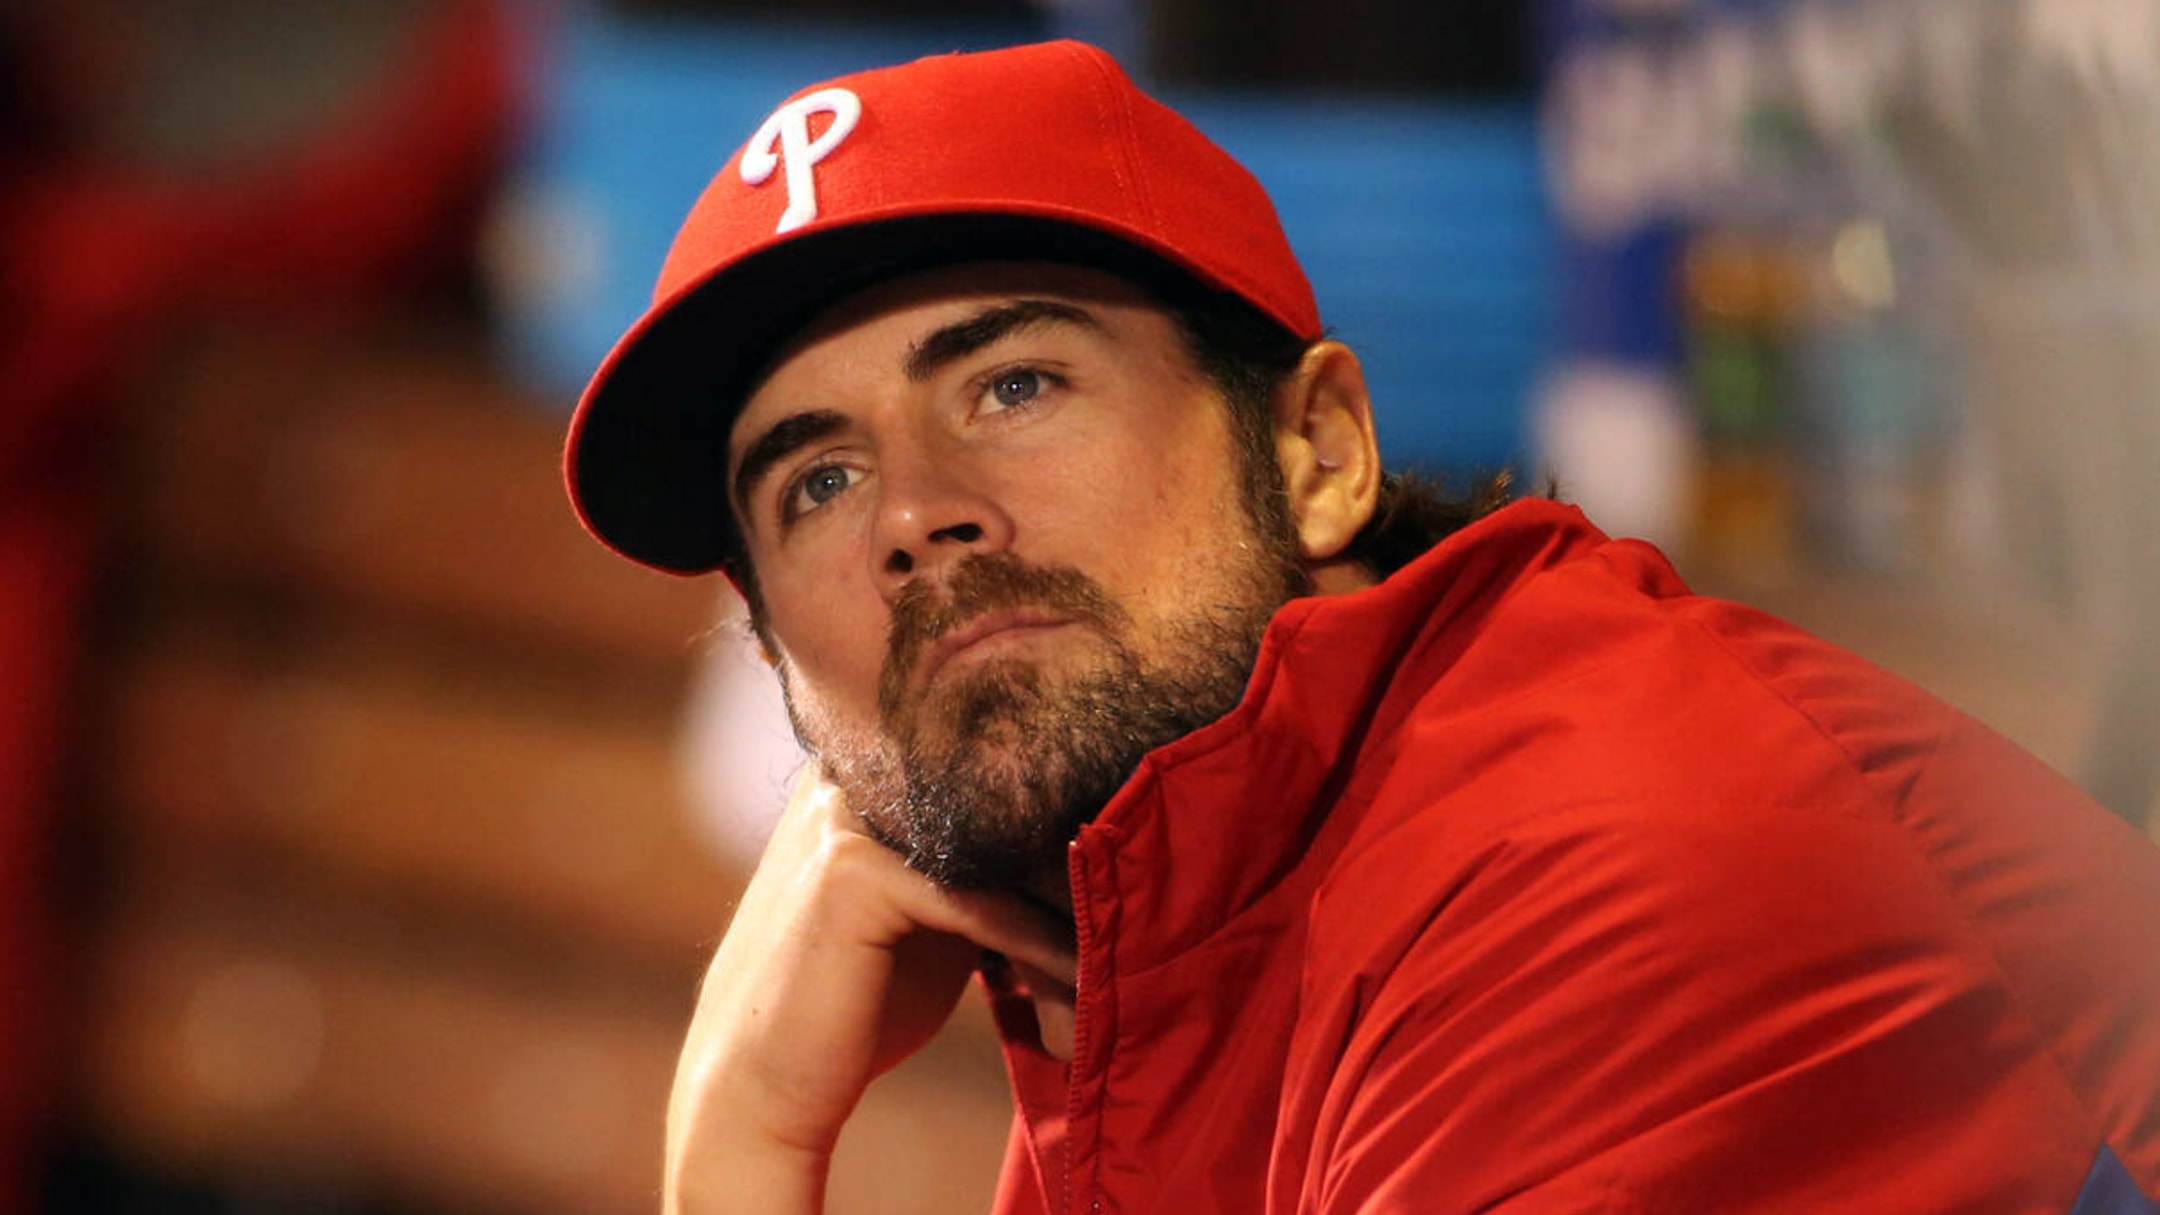 Phillies World Series MVP Cole Hamels officially retires